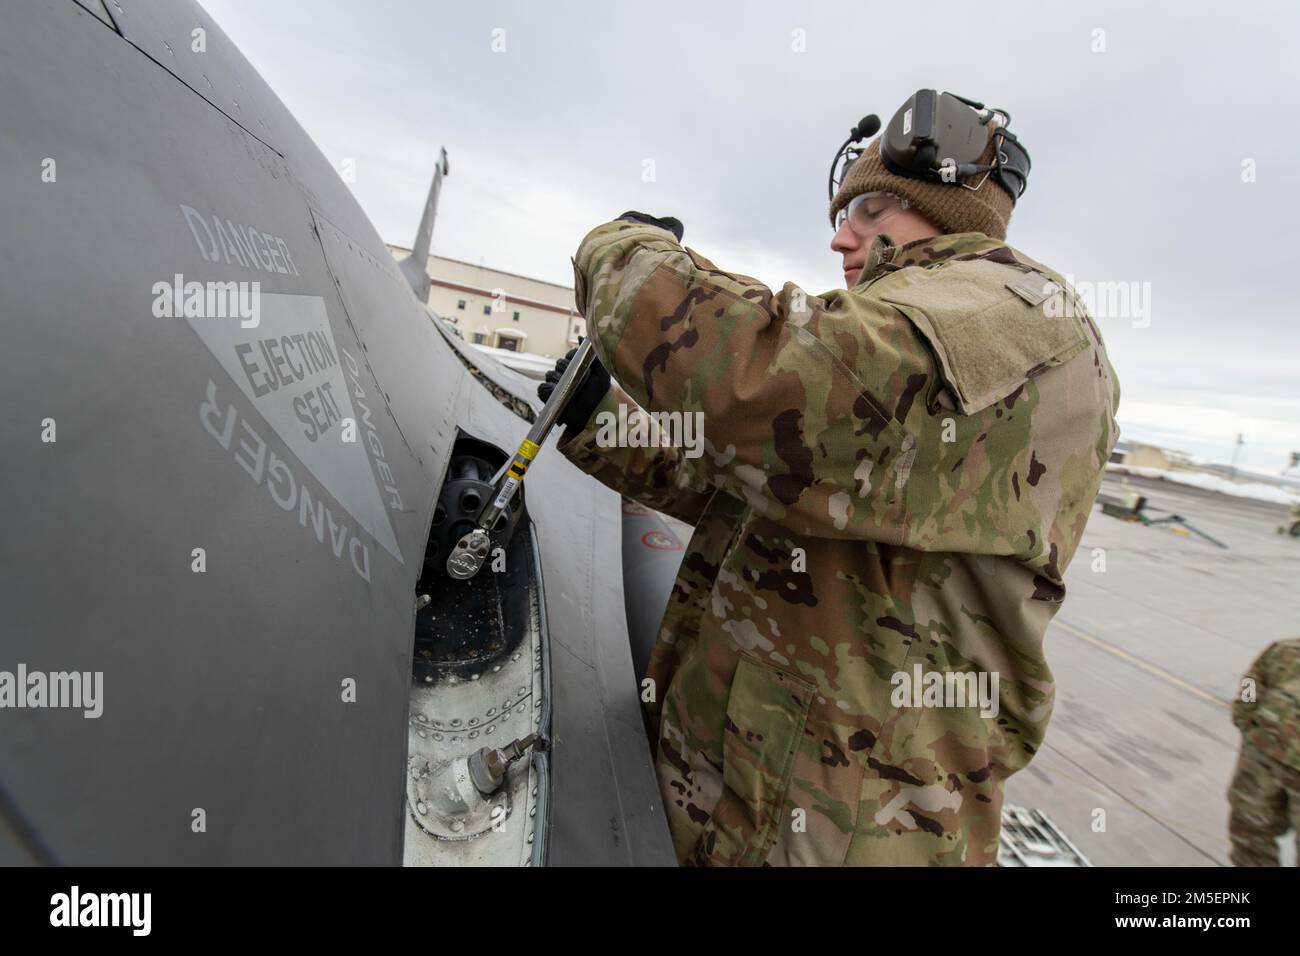 U.S. Air Force Senior Airman Hunter Duby, an aircraft armament systems specialist assigned to the Ohio National Guard’s 180th Fighter Wing, conducts an inspection of an M61A1 Vulcan Cannon on an F-16 Fighting Falcon, assigned to the 180FW, at Joint Base Elmendorf-Richardson, Alaska, during U.S. Northern Command Exercise ARCTIC EDGE 2022, March 8, 2022. AE22 is a biennial homeland defense exercise designed for U.S. and Canadian Armed Forces to demonstrate and exercise a joint capability to rapidly deploy and operate in the Arctic. Stock Photo